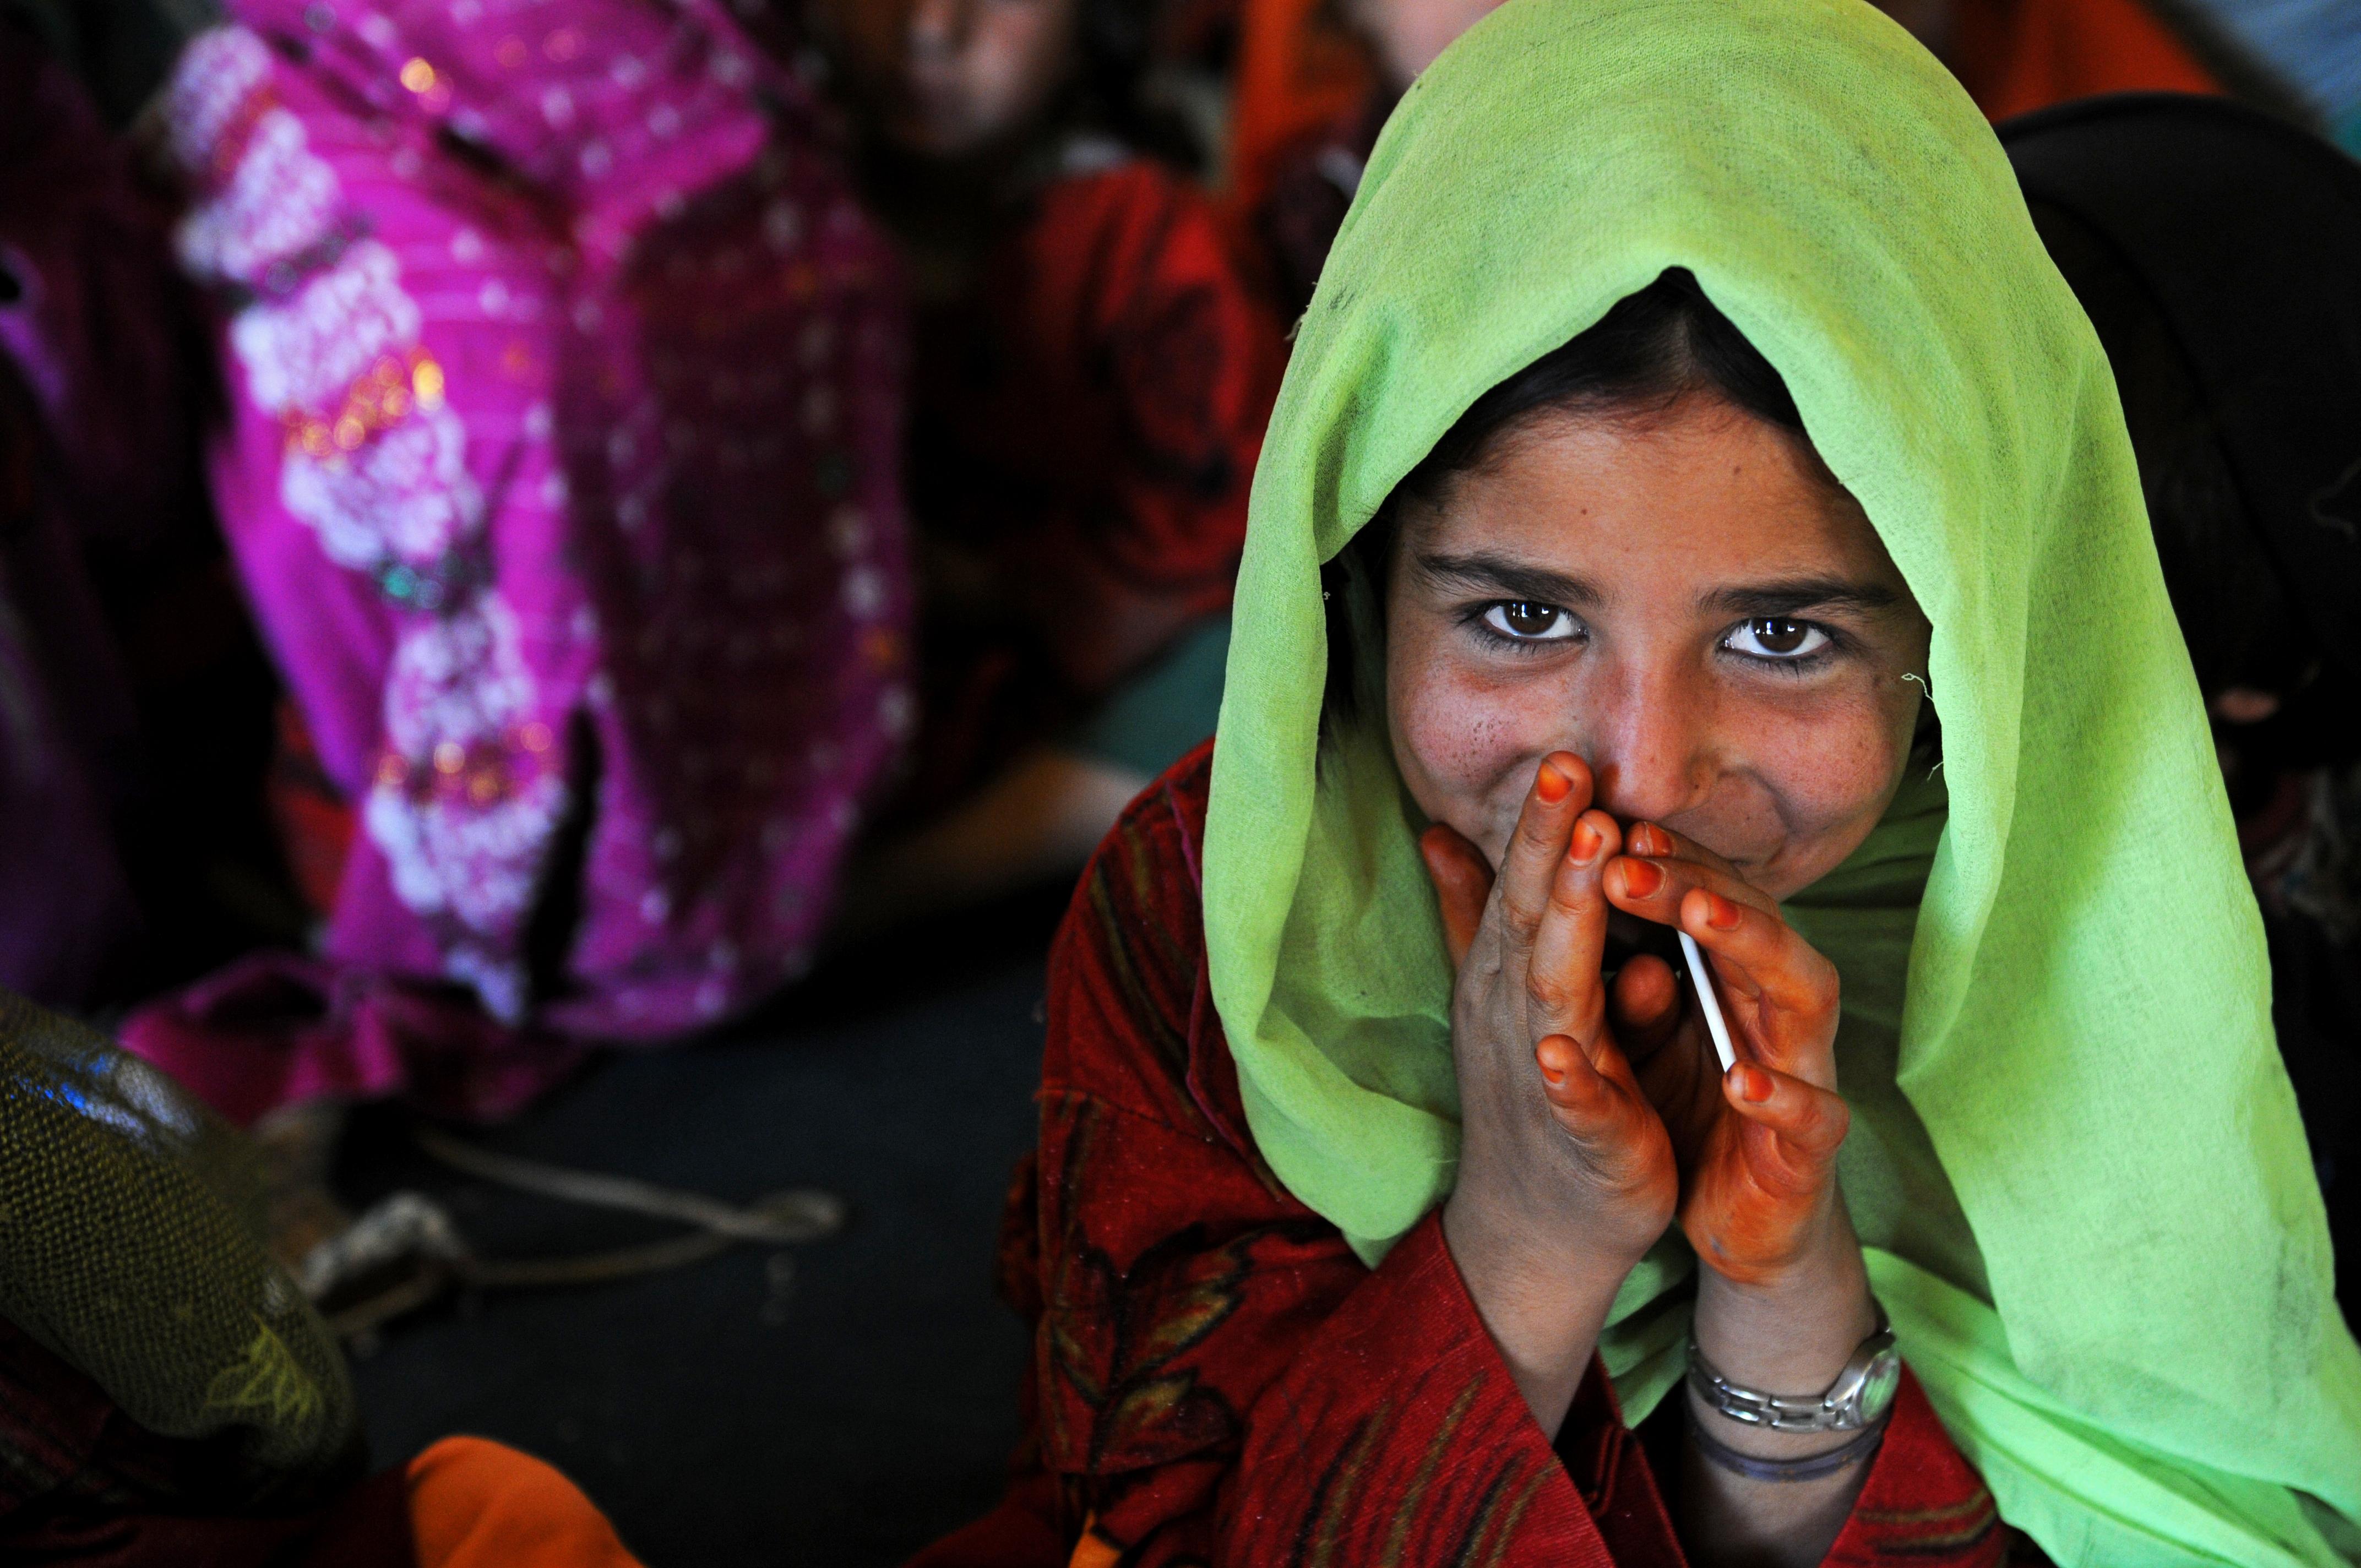 A young Afghan girl smiles shyly 